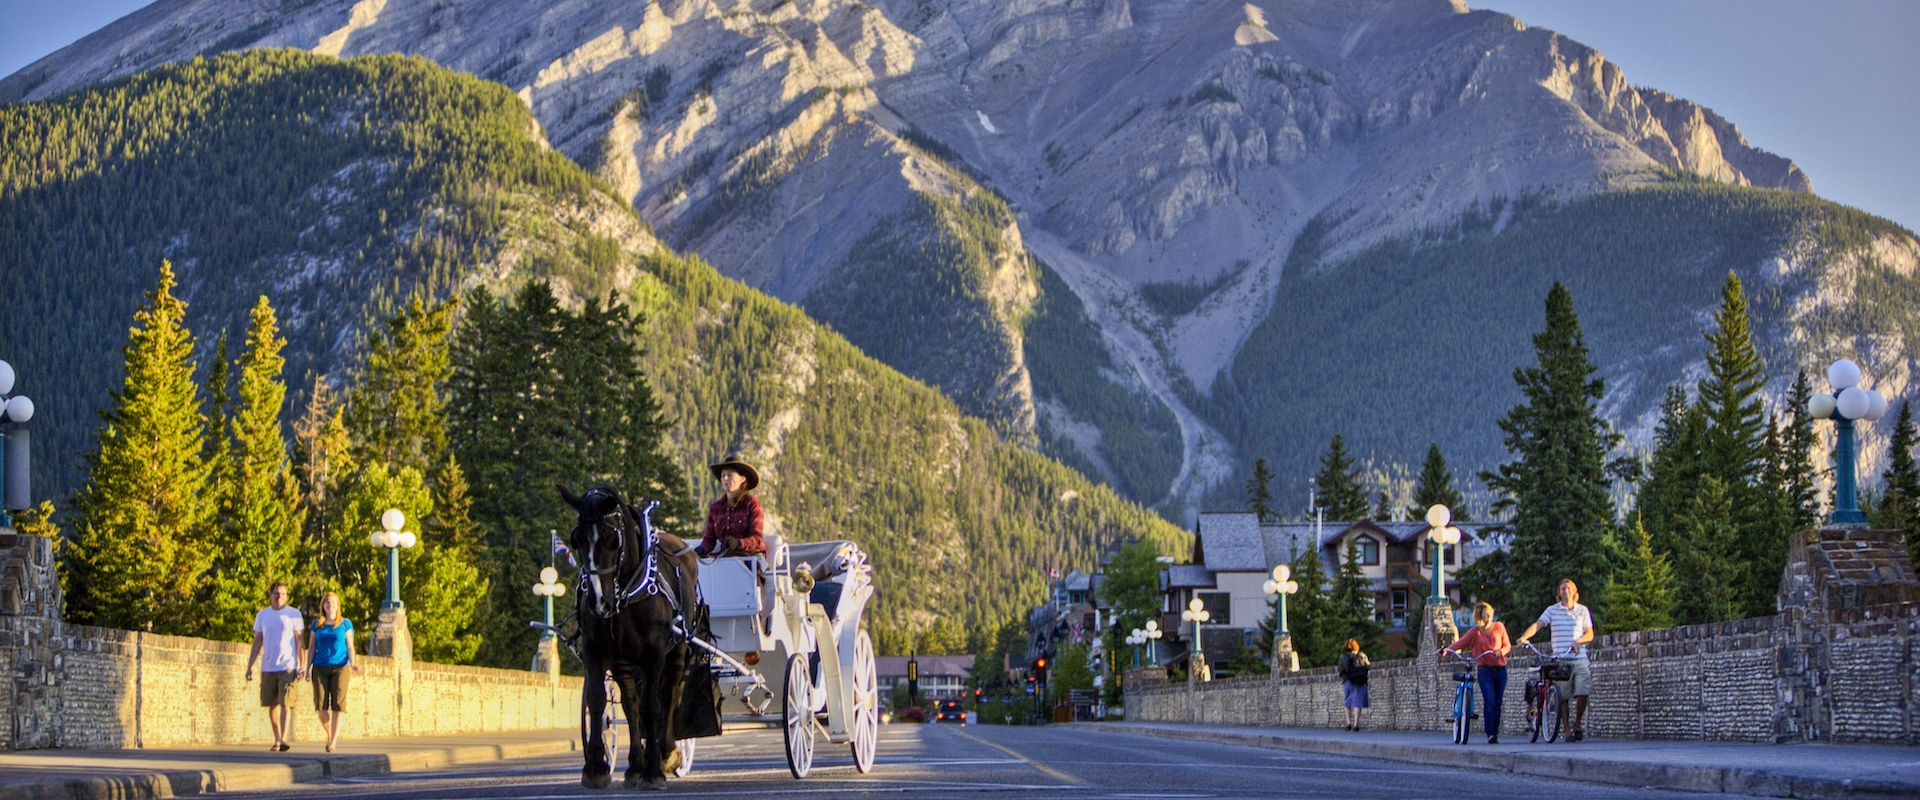 Carriage Rides Through the Town of Banff with Banff Trail Riders